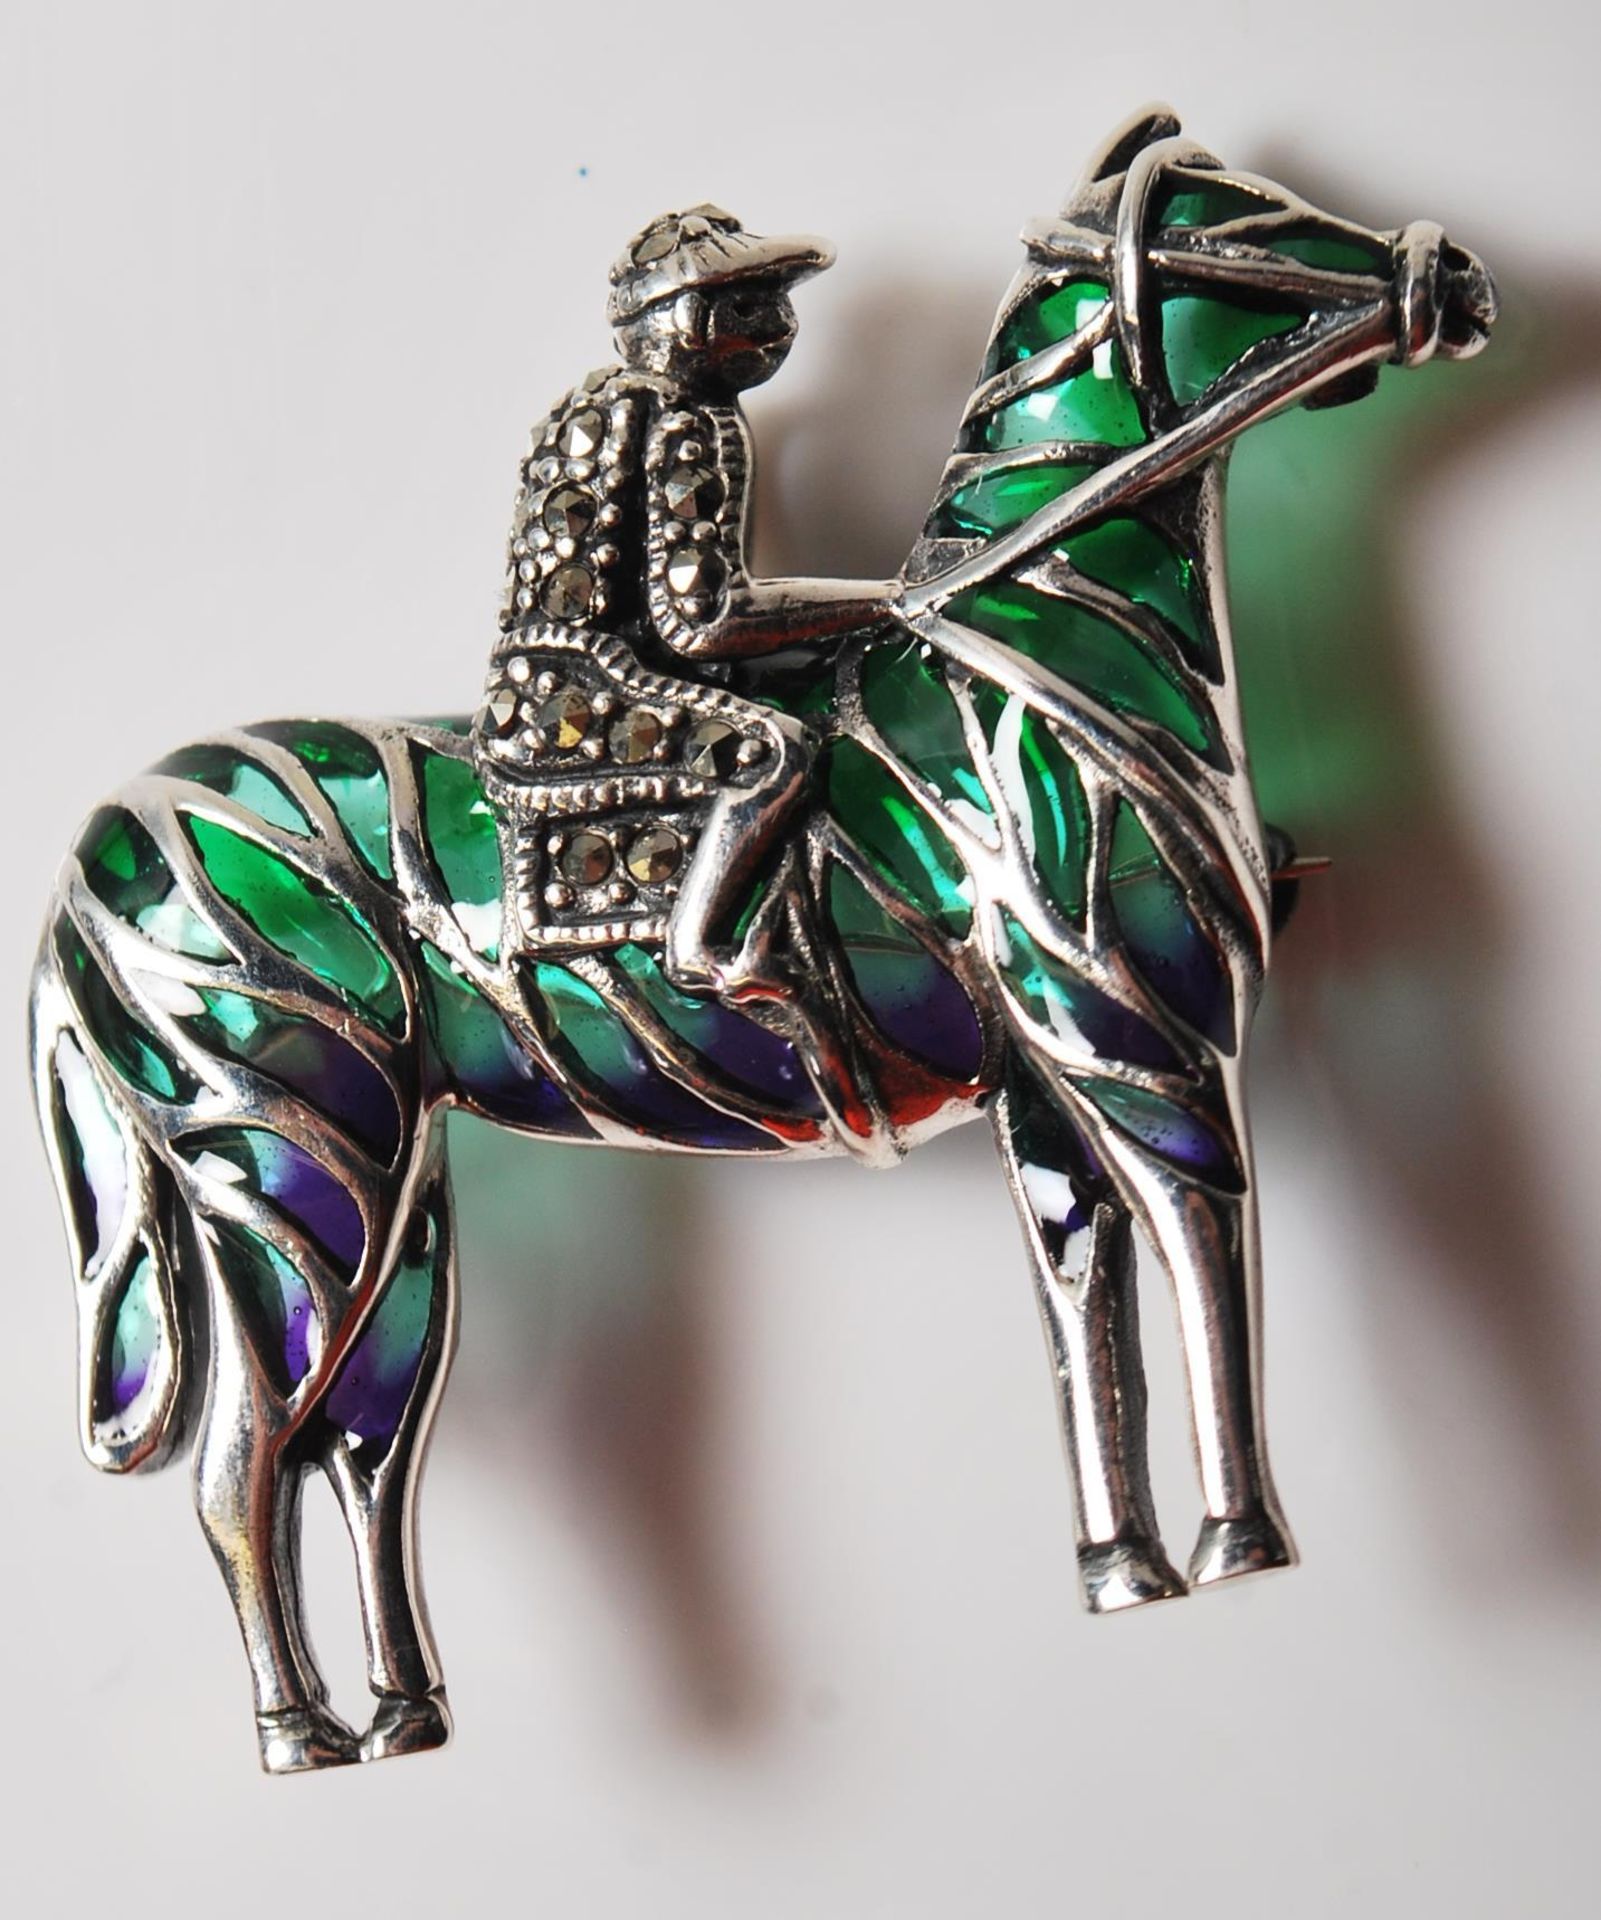 SILVER AND MARCASITE HORSE RACING BROOCH - Image 2 of 6